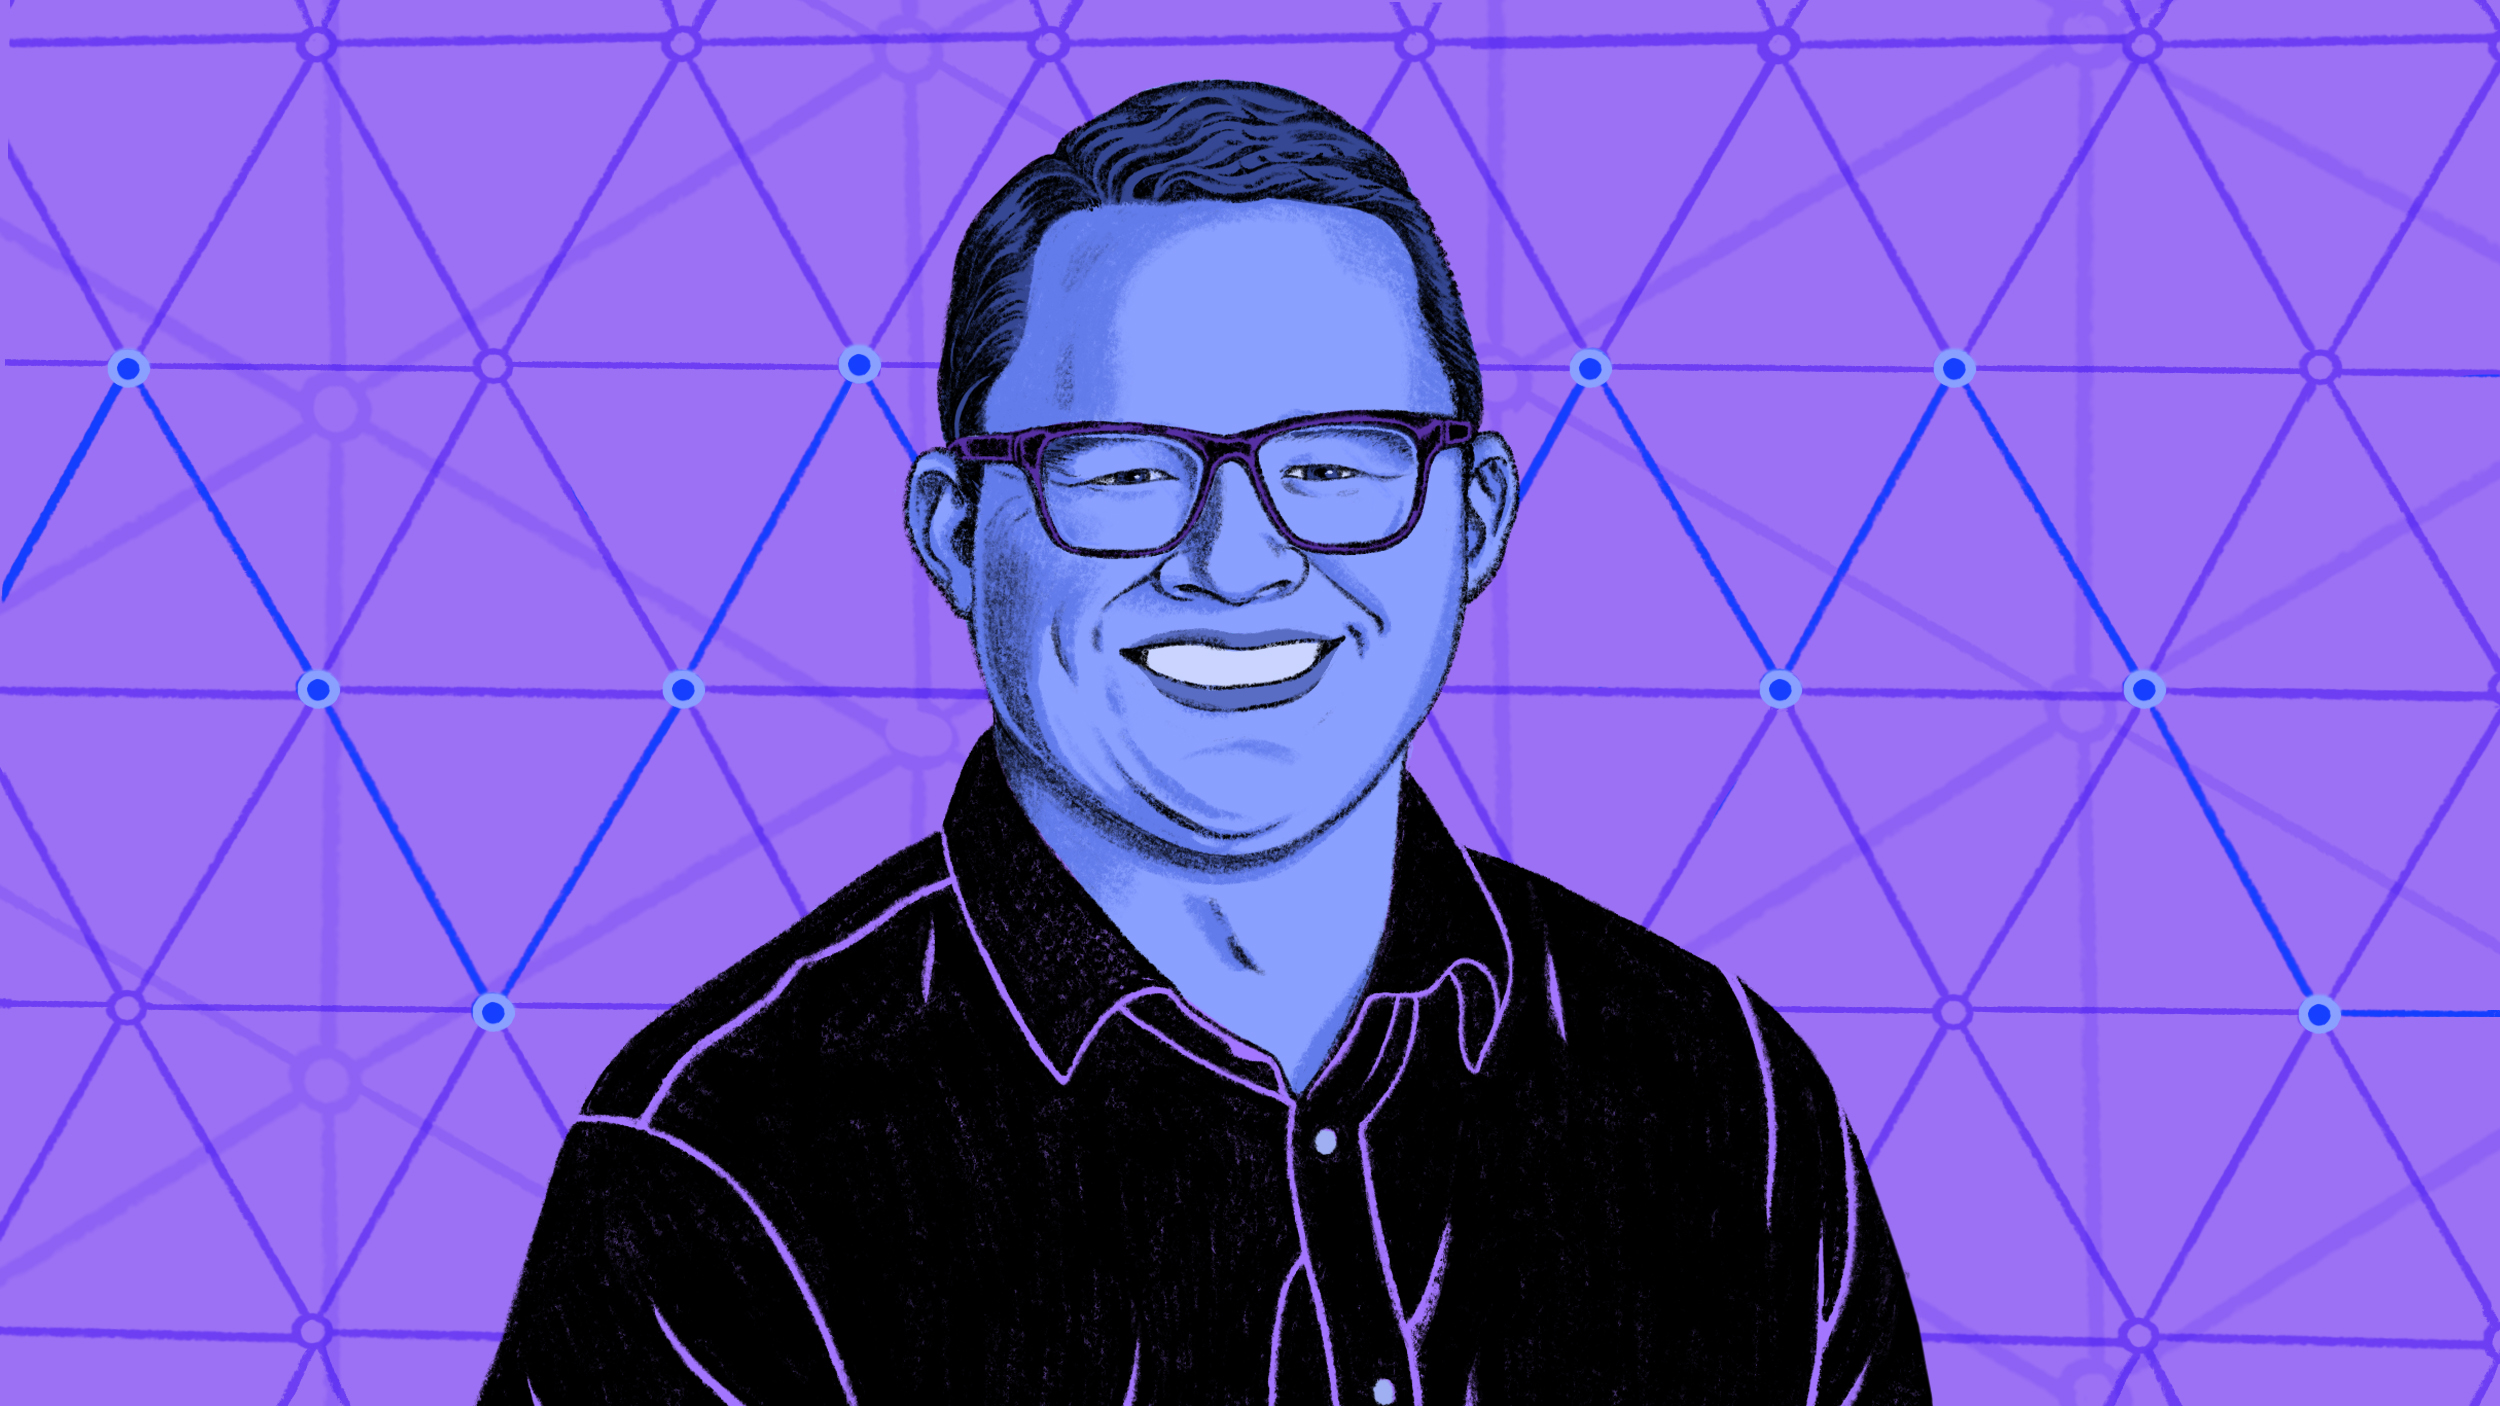 Illustration of a smiling man wearing glasses against a geometric background, unraveling the secret of good AI.